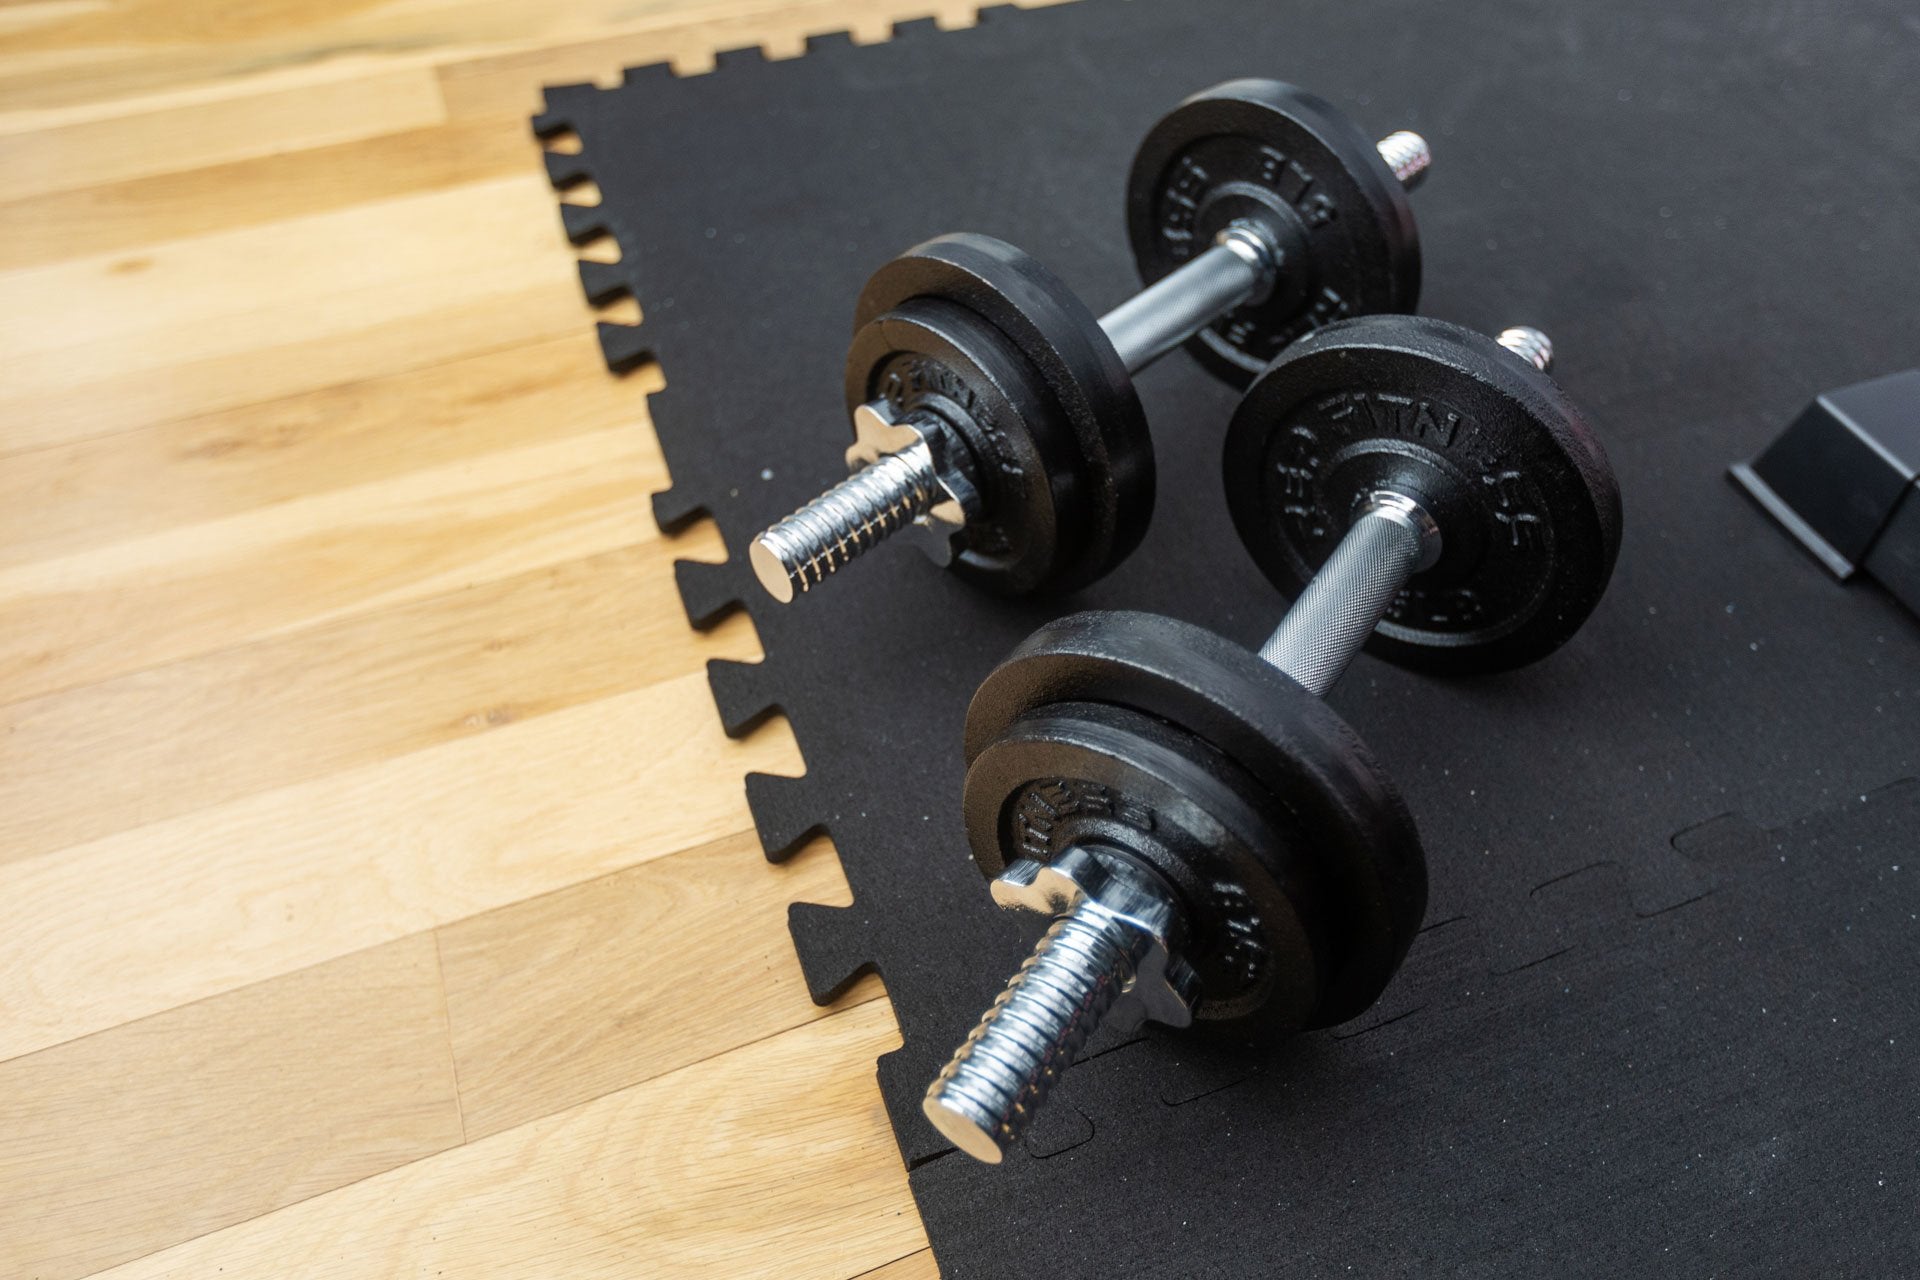 Close-up view of a pair of Adjustable Dumbbells loaded with 30lbs of weight.